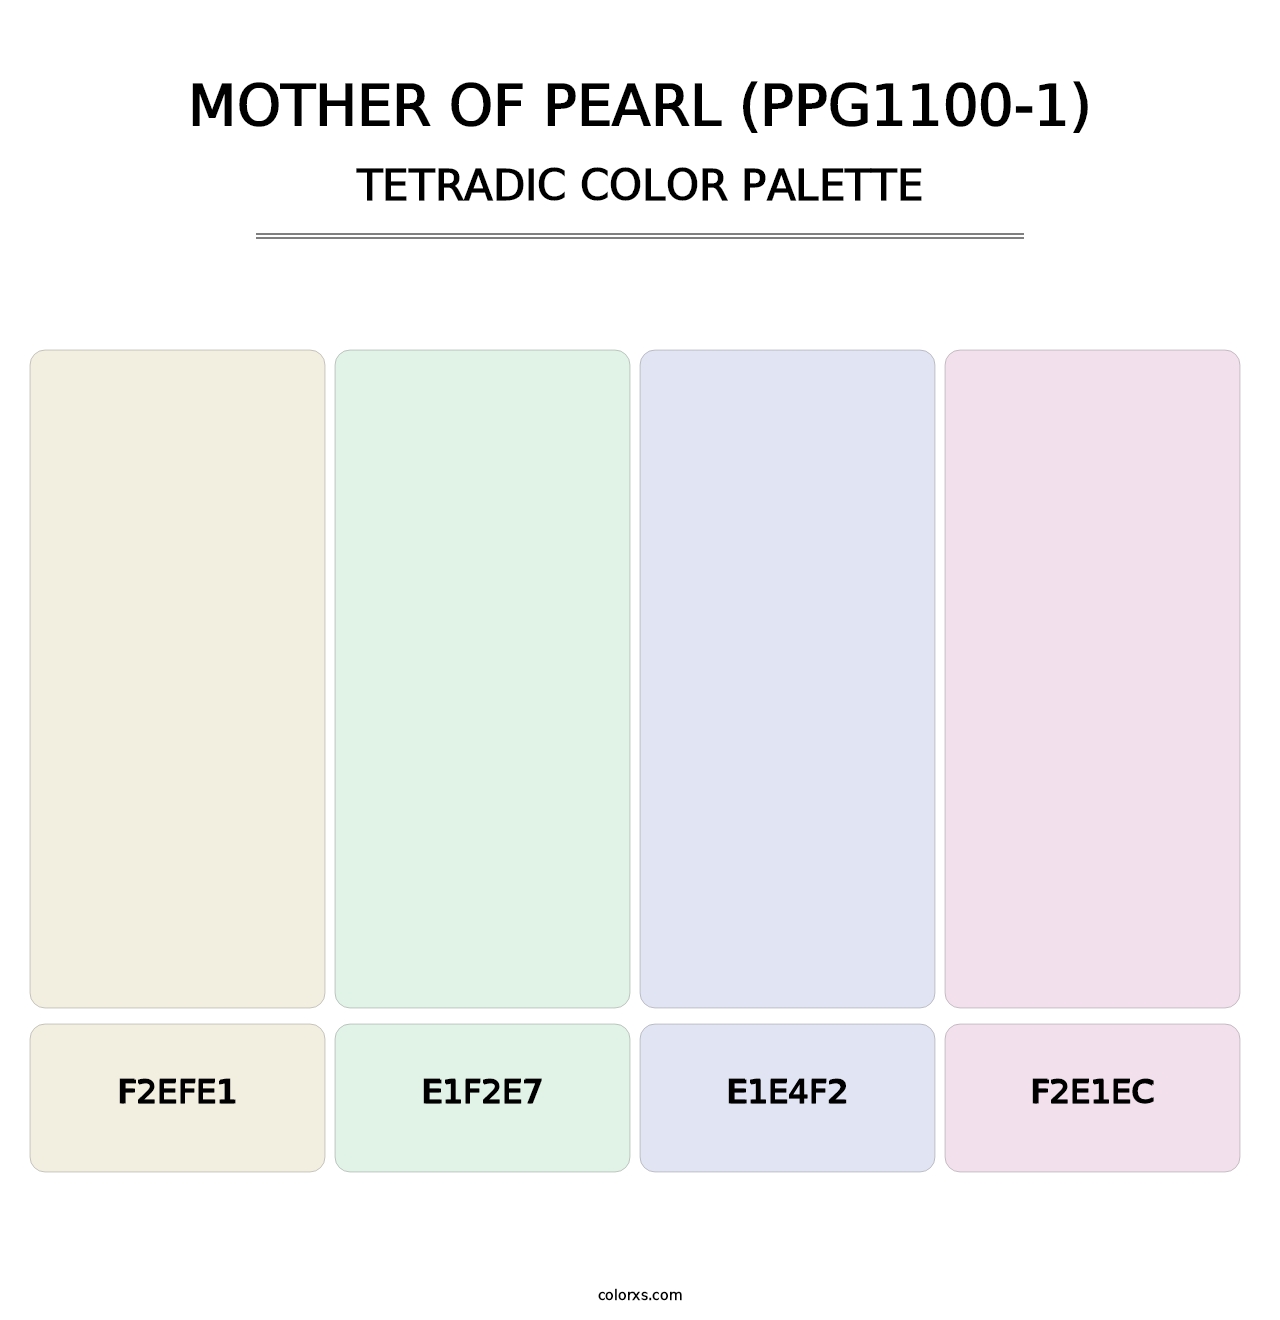 Mother Of Pearl (PPG1100-1) - Tetradic Color Palette